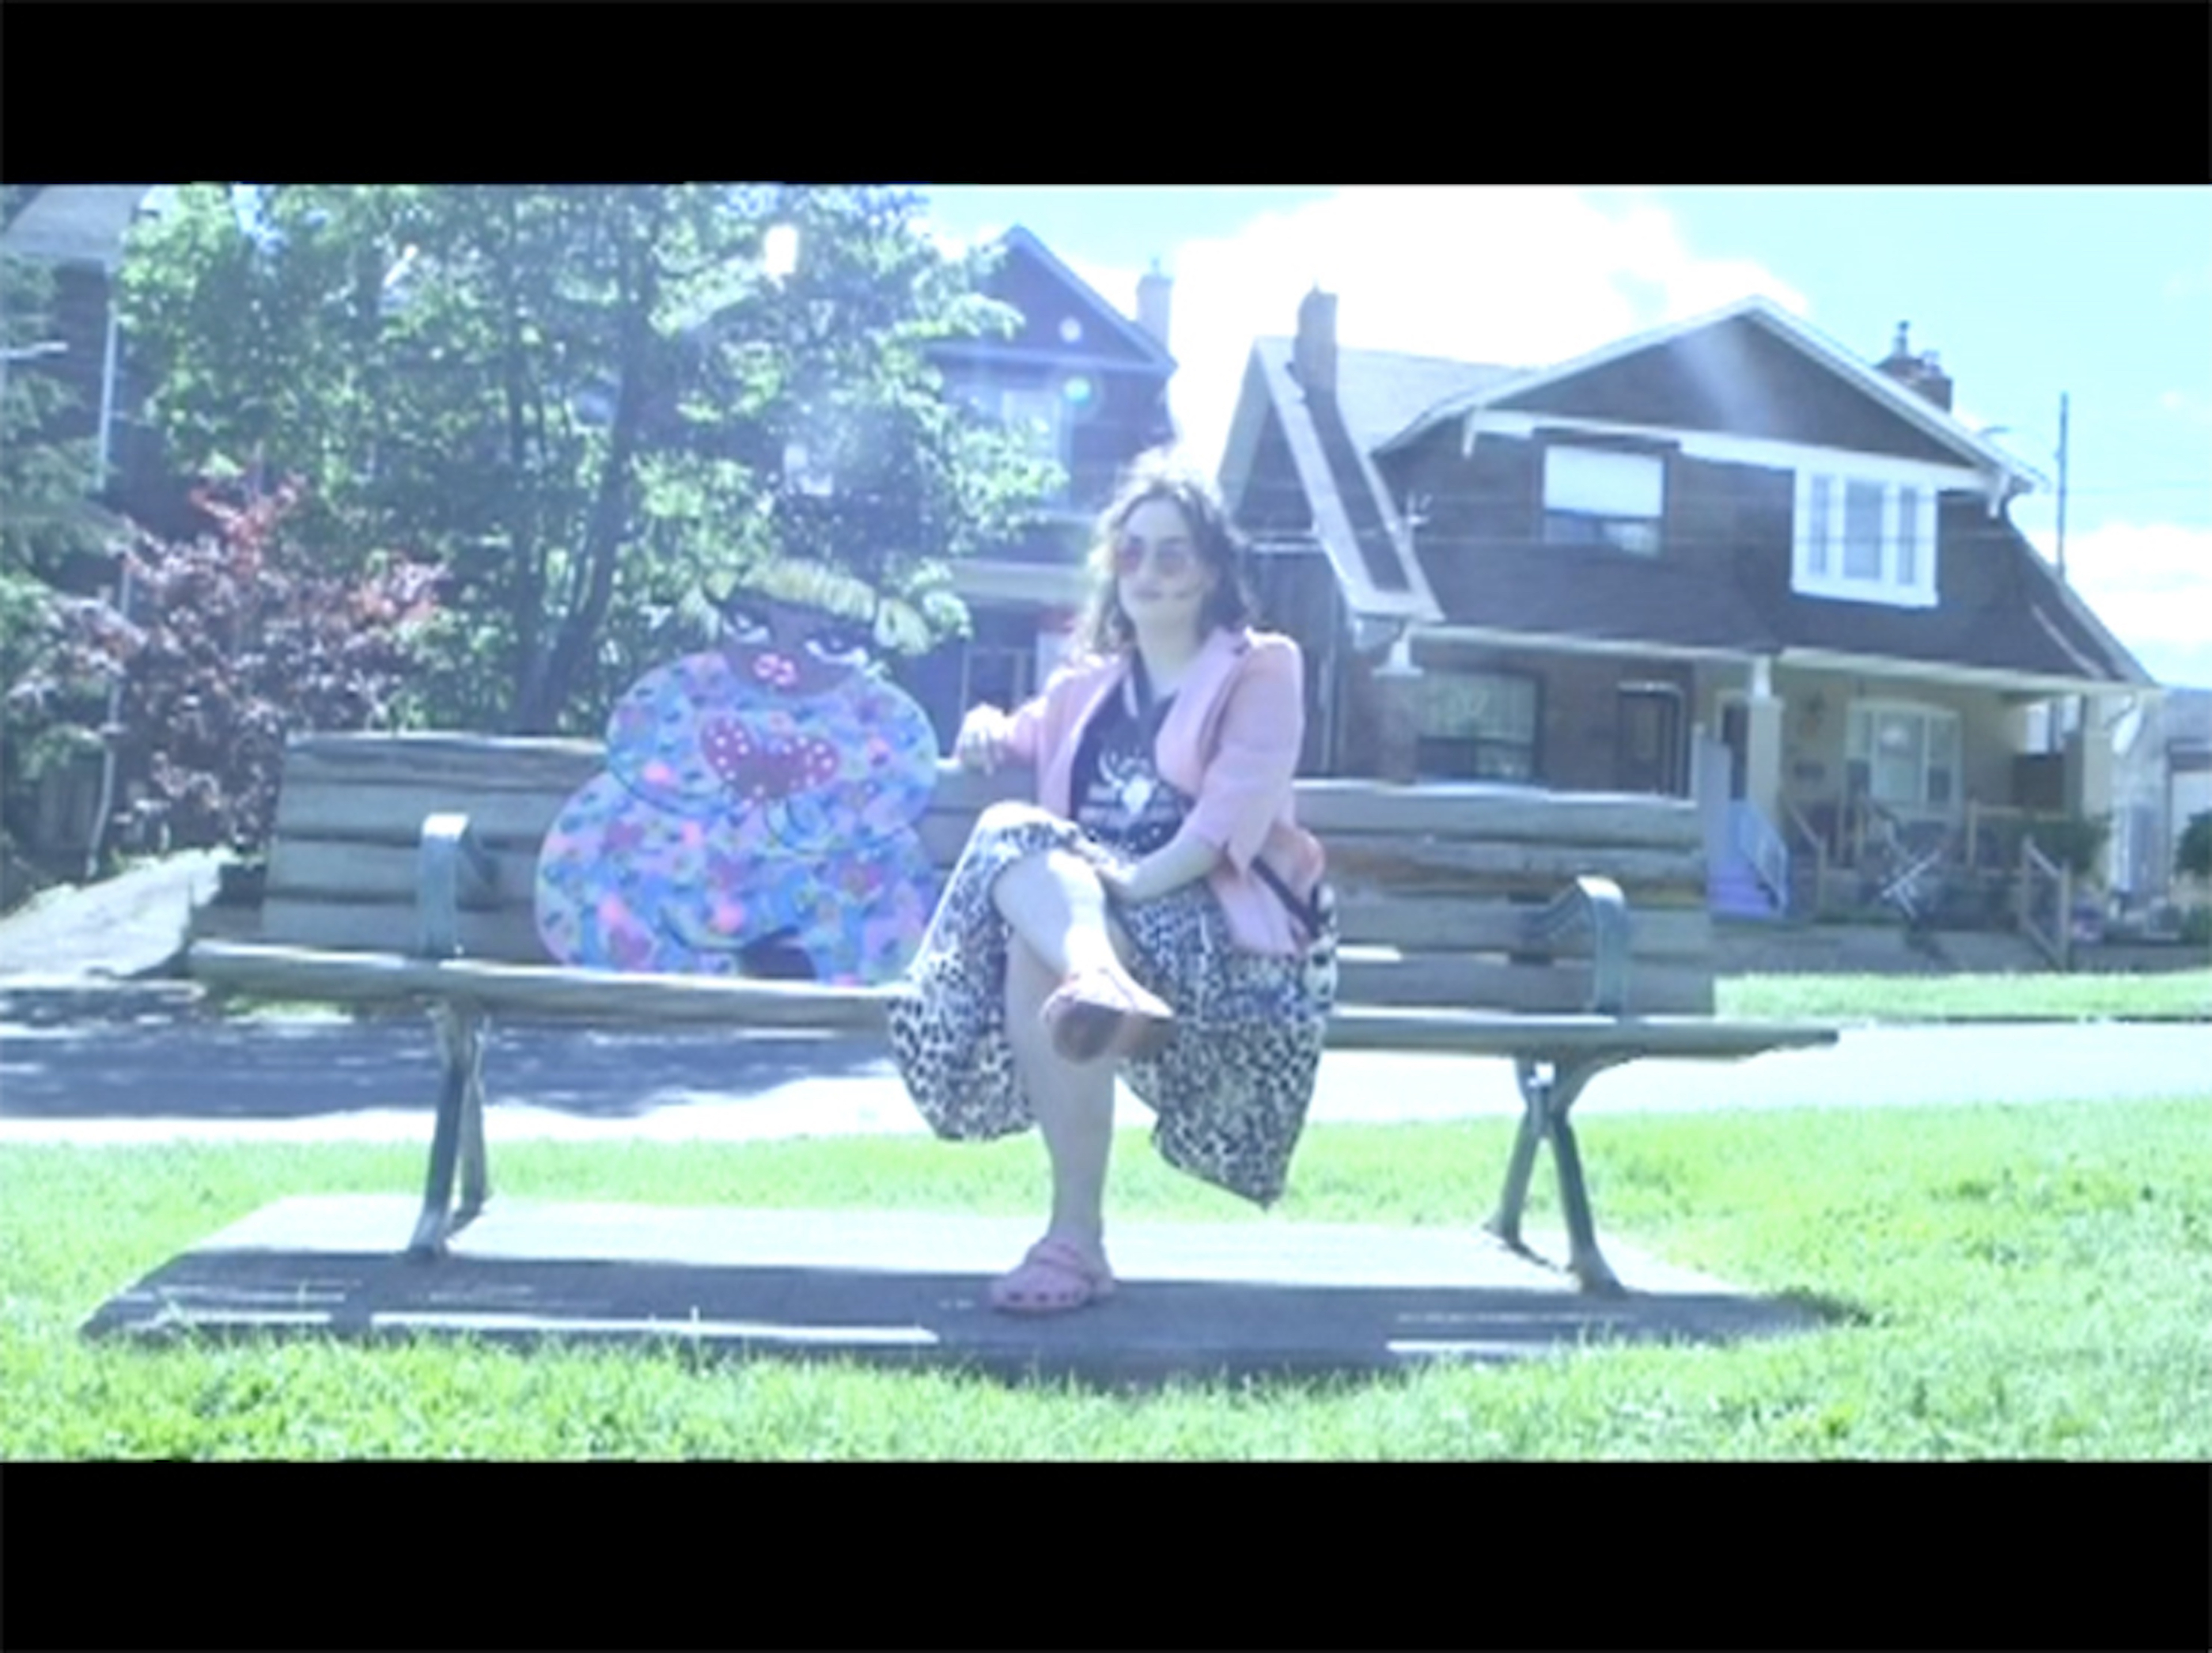 A still from the film "Activate NDN Consciousness" by Natalie King. The still features a woman sitting on a public bench alongside a two-dimensional wood caricature of a woman of color.